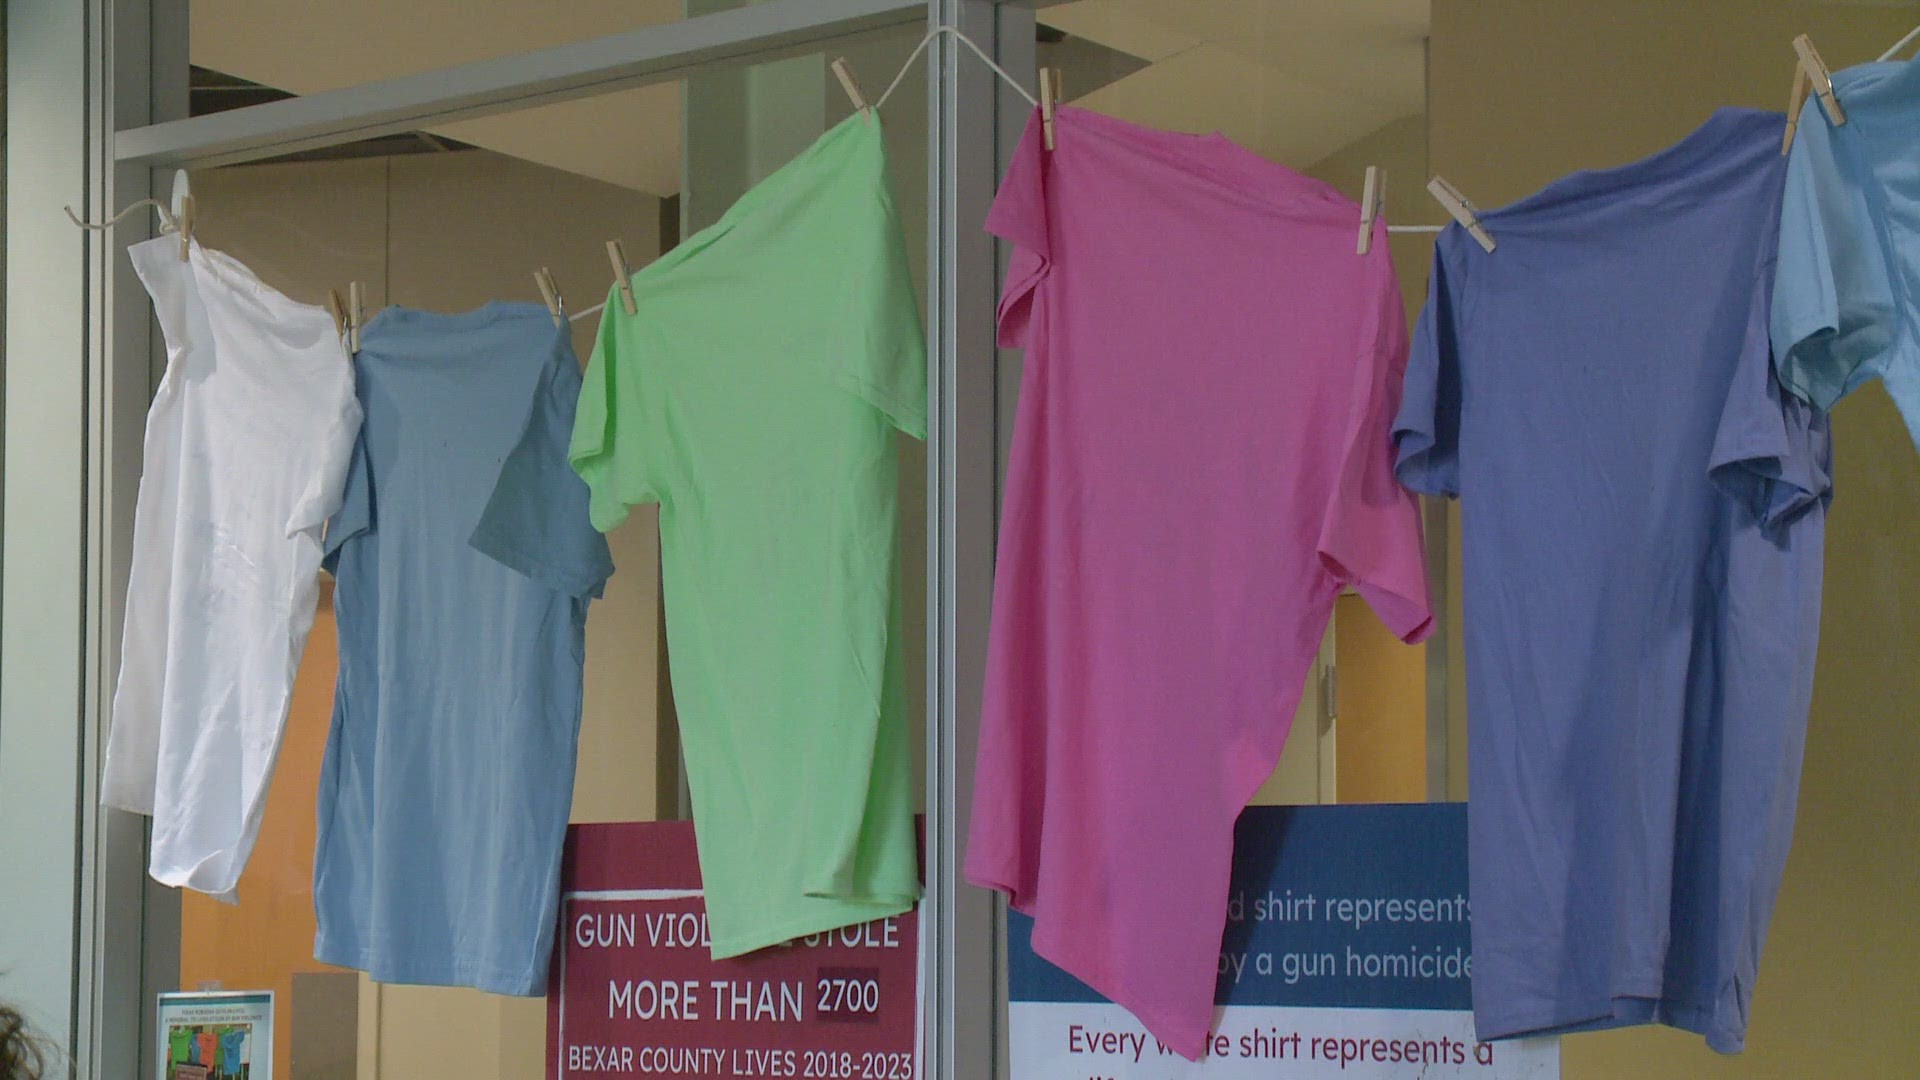 Students at Northwest Vista College decorated t-shirts in honor of victims of gun violence for Justice Week.